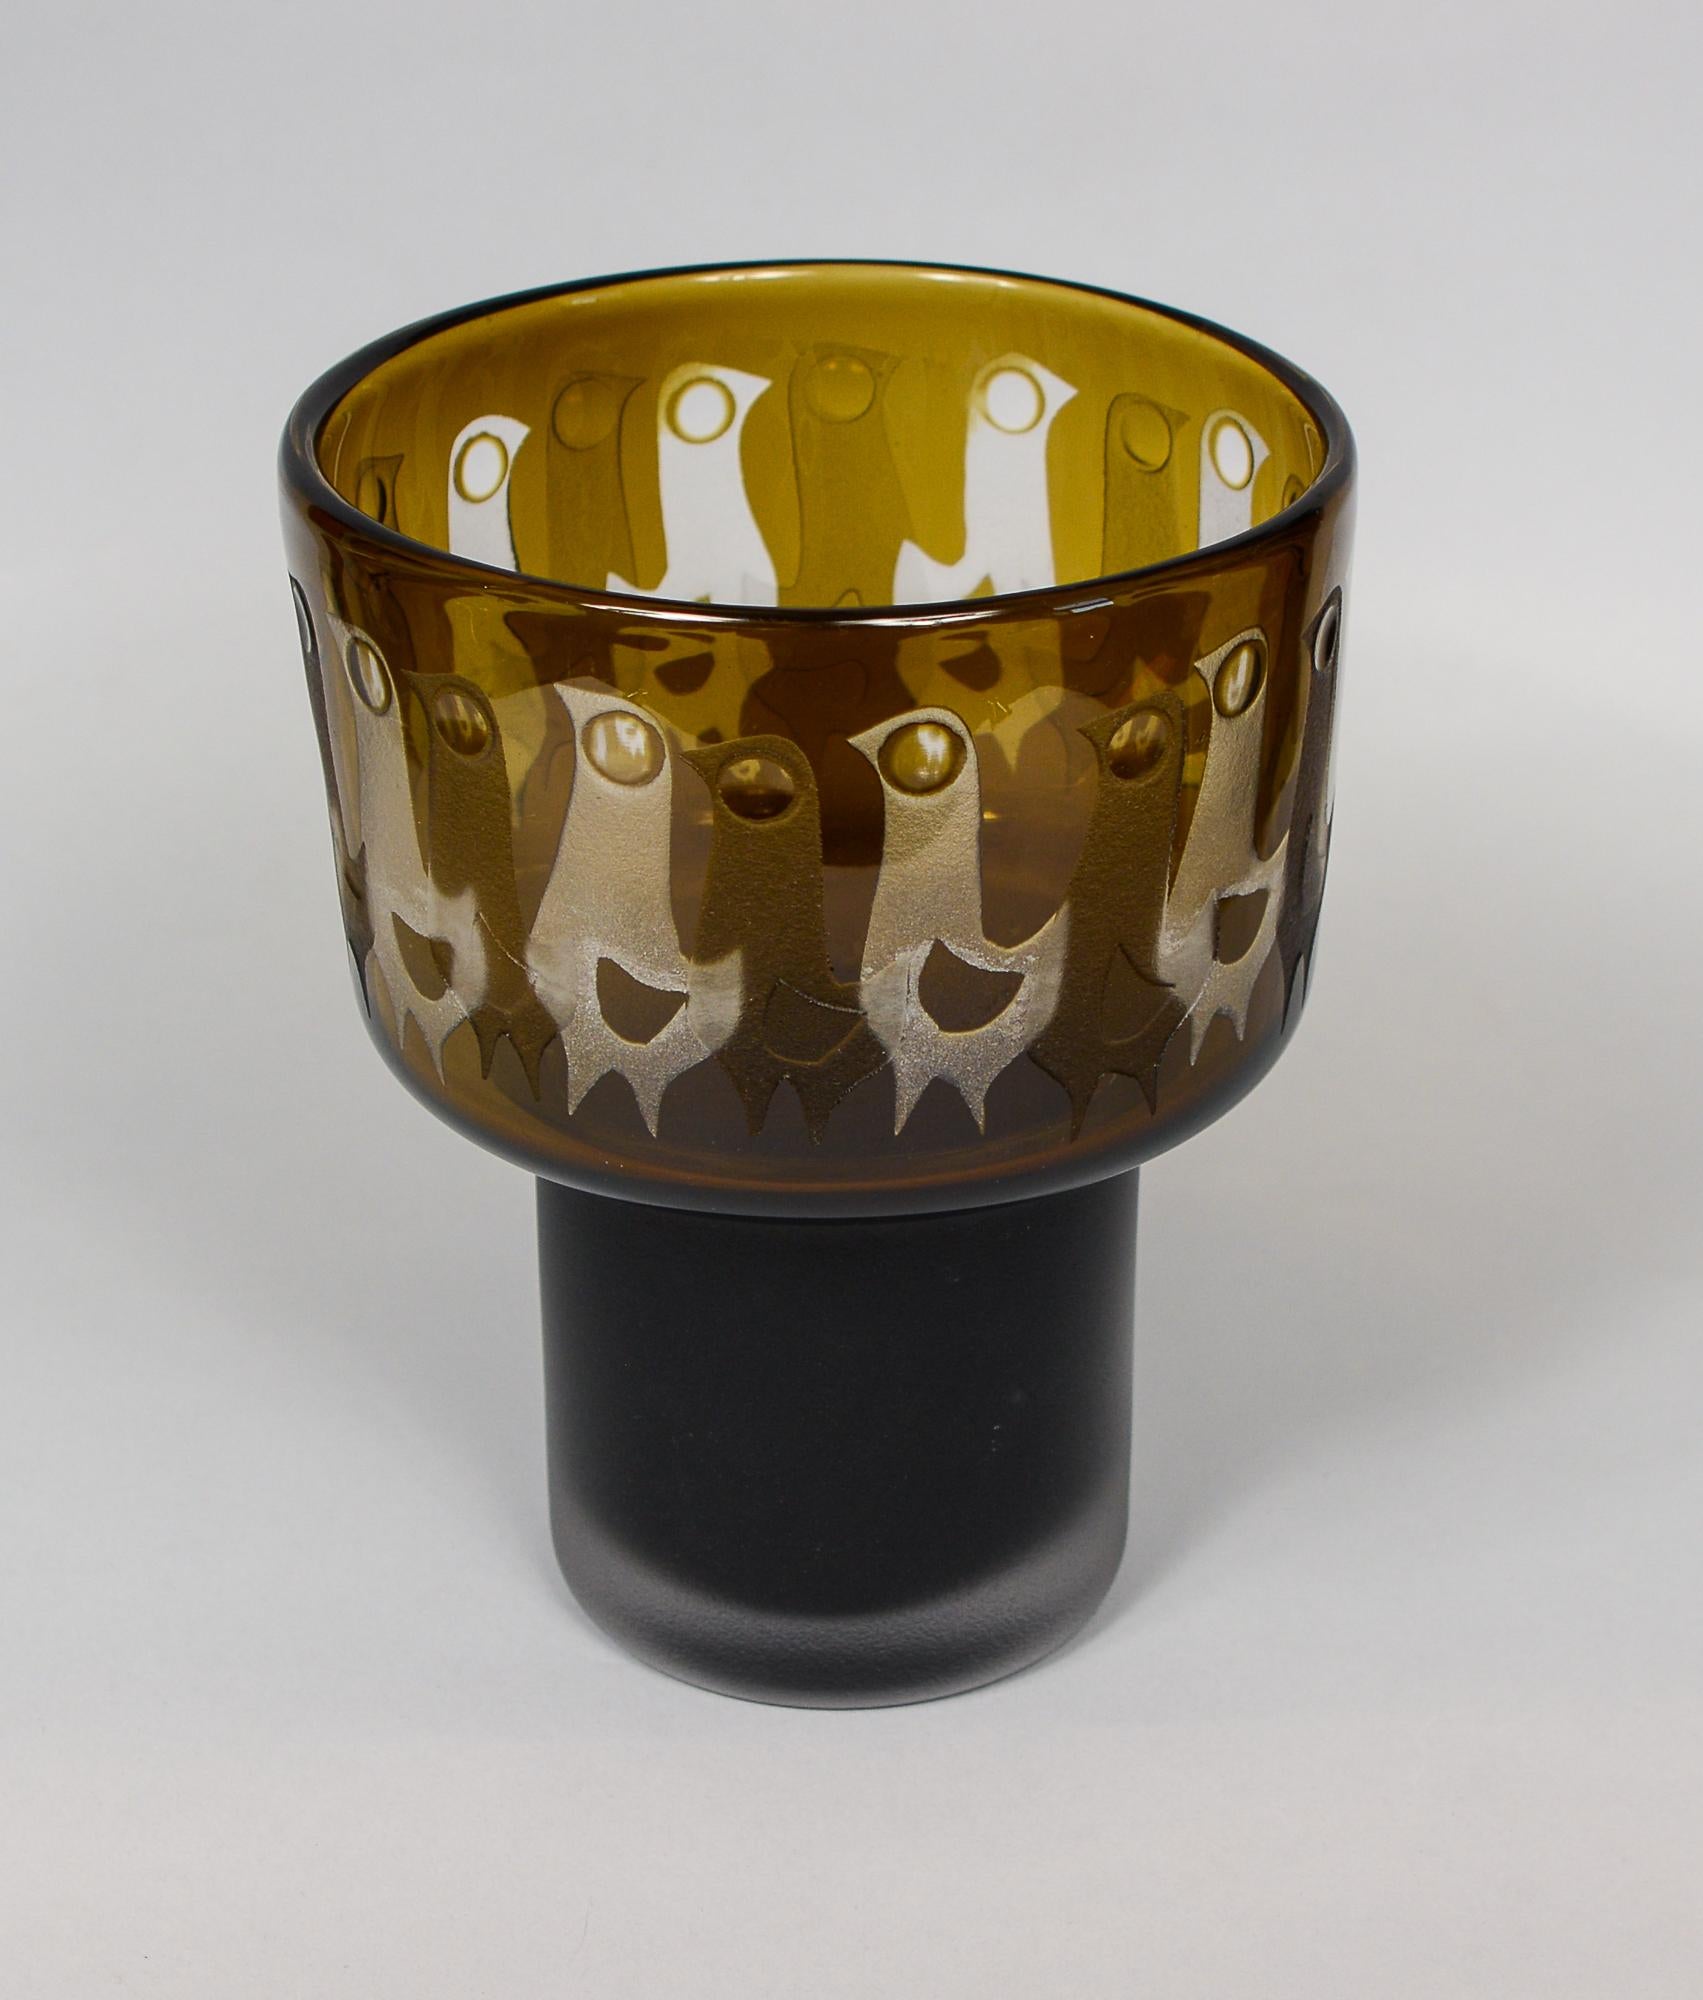 Cased glass bird vase designed by Ove Sandeberg for Kosta. There are acid etched birds around the vase both on the inside and outside. The inside birds are cut to clear. 